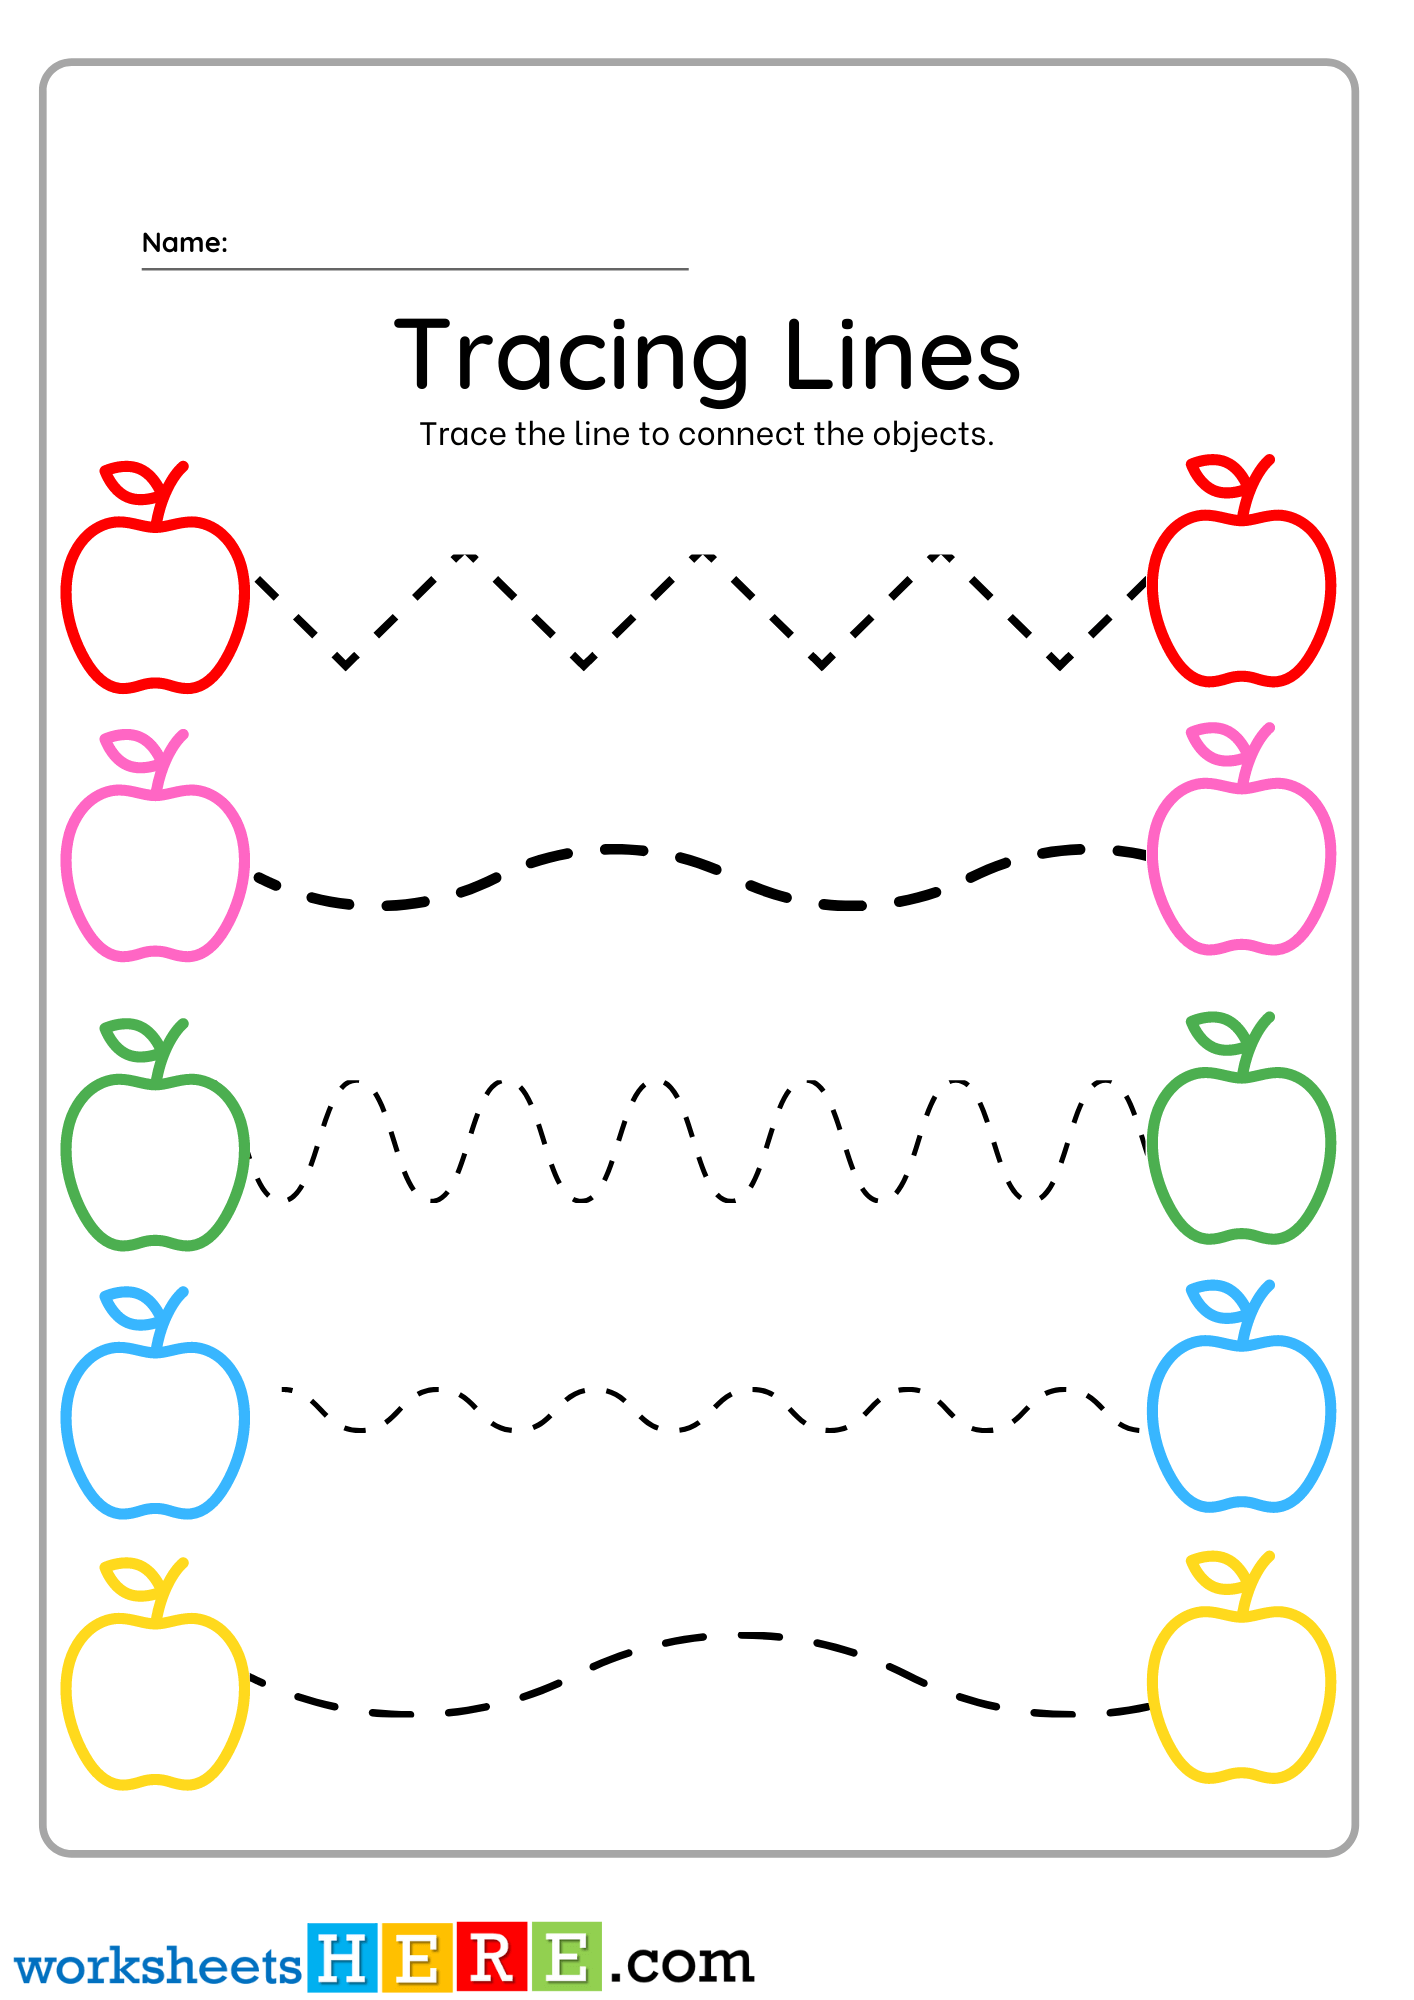 Tracing Lines Worksheet, Trace the Lines with Apples PDF Worksheet For Kindergarten